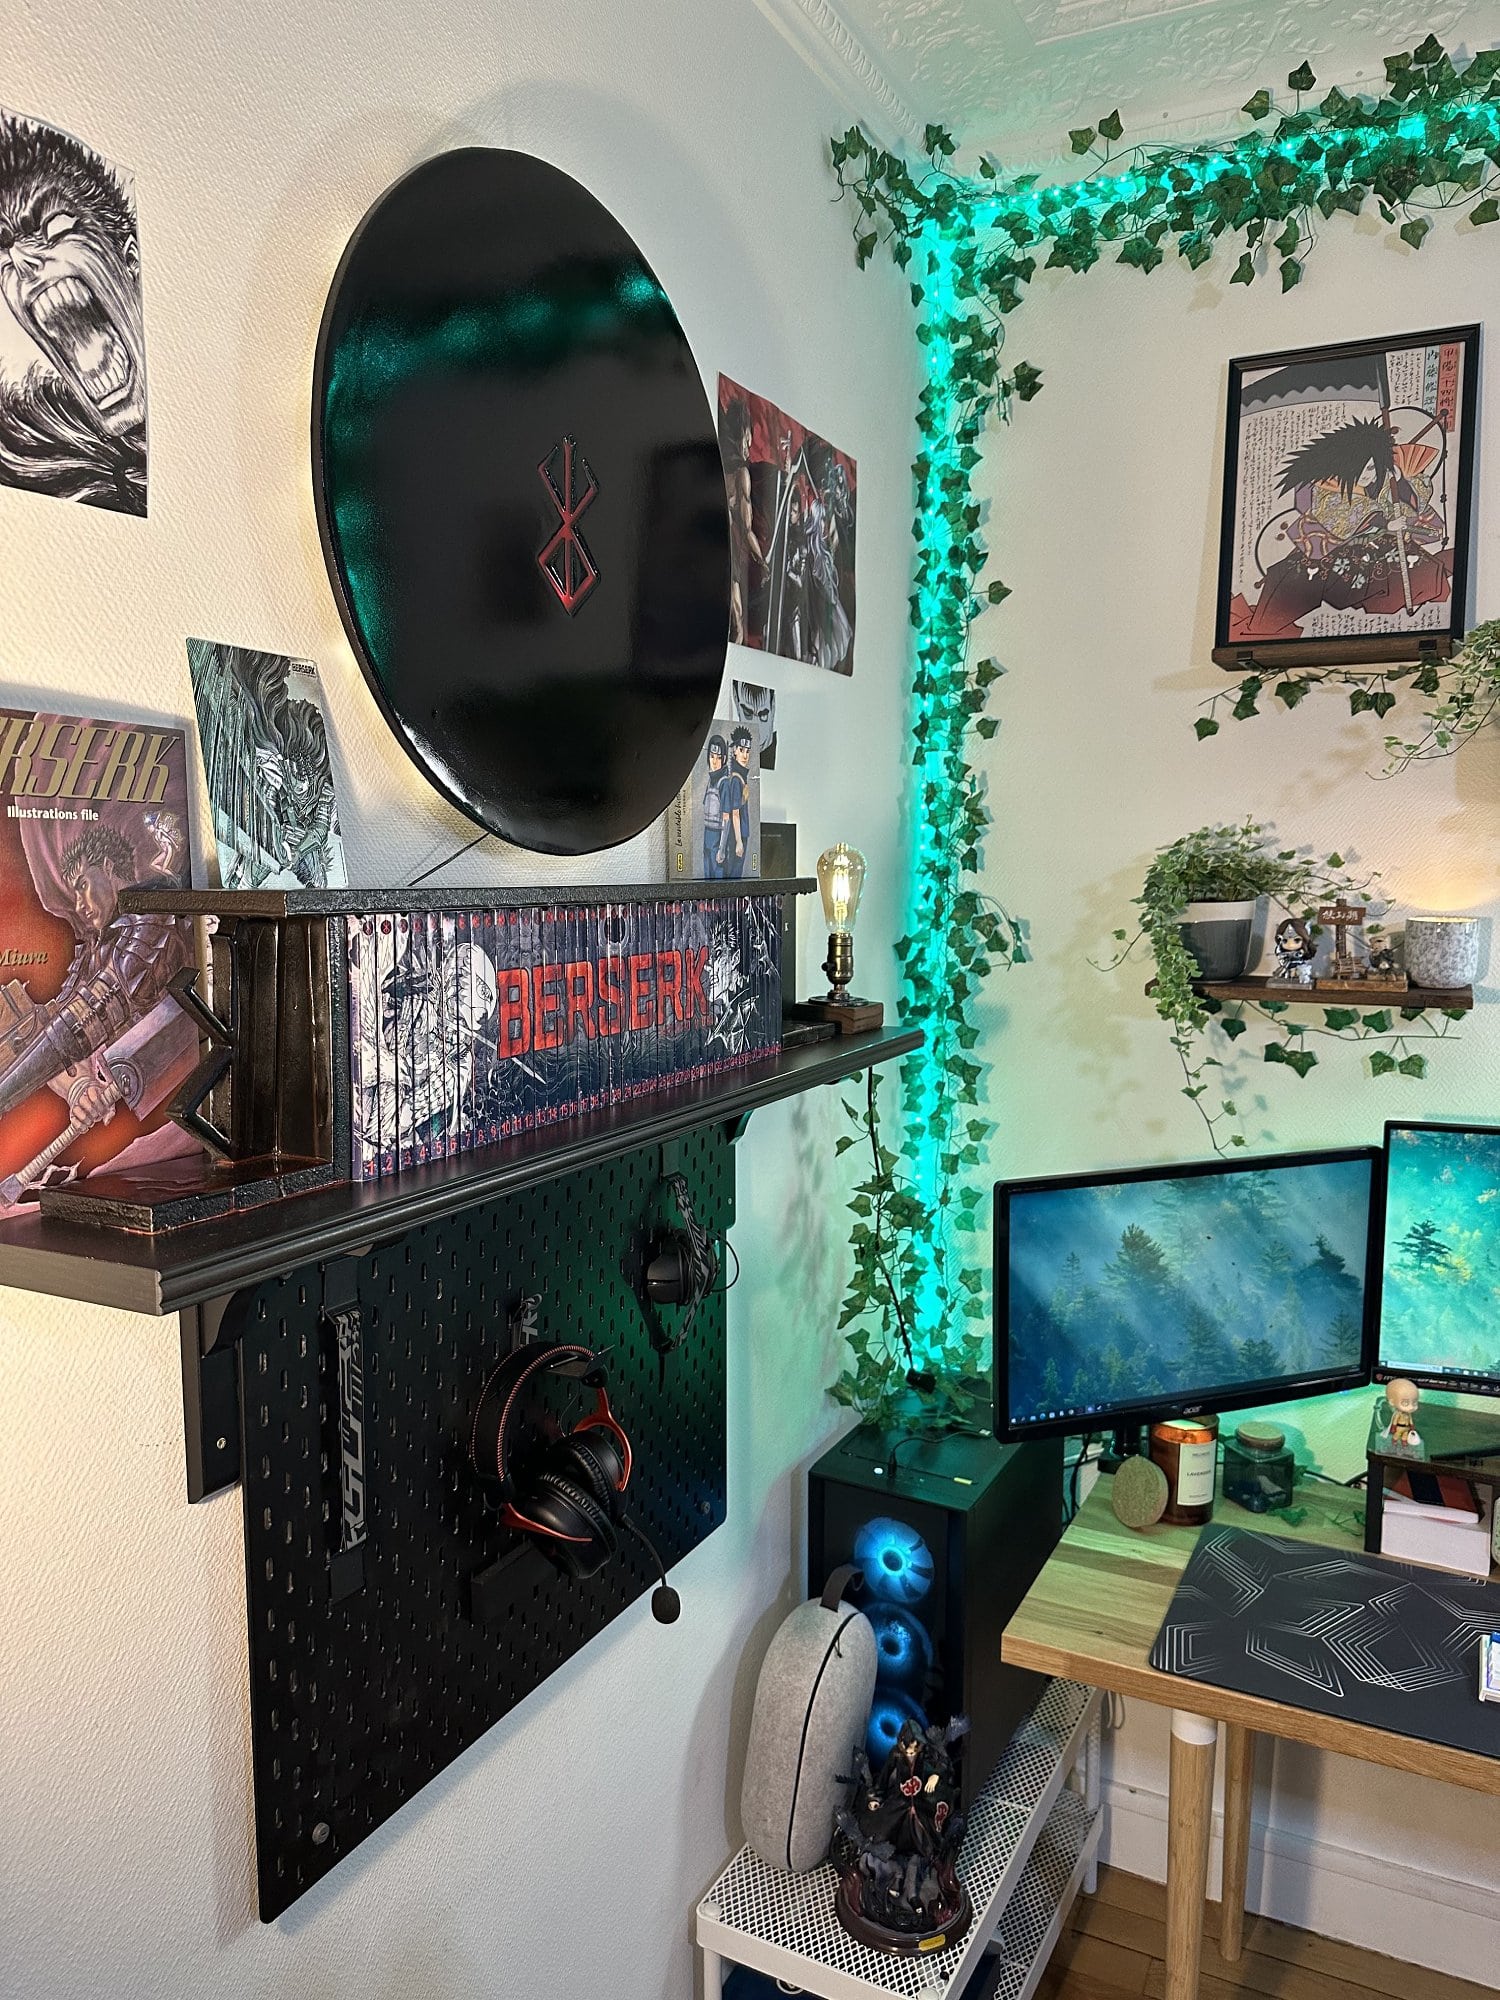 A personal home battlestation featuring two gaming monitors, fake climbing ivy, a black pegboard holding headphones and a mouse, and a Berserk anime silhouette light on the wall